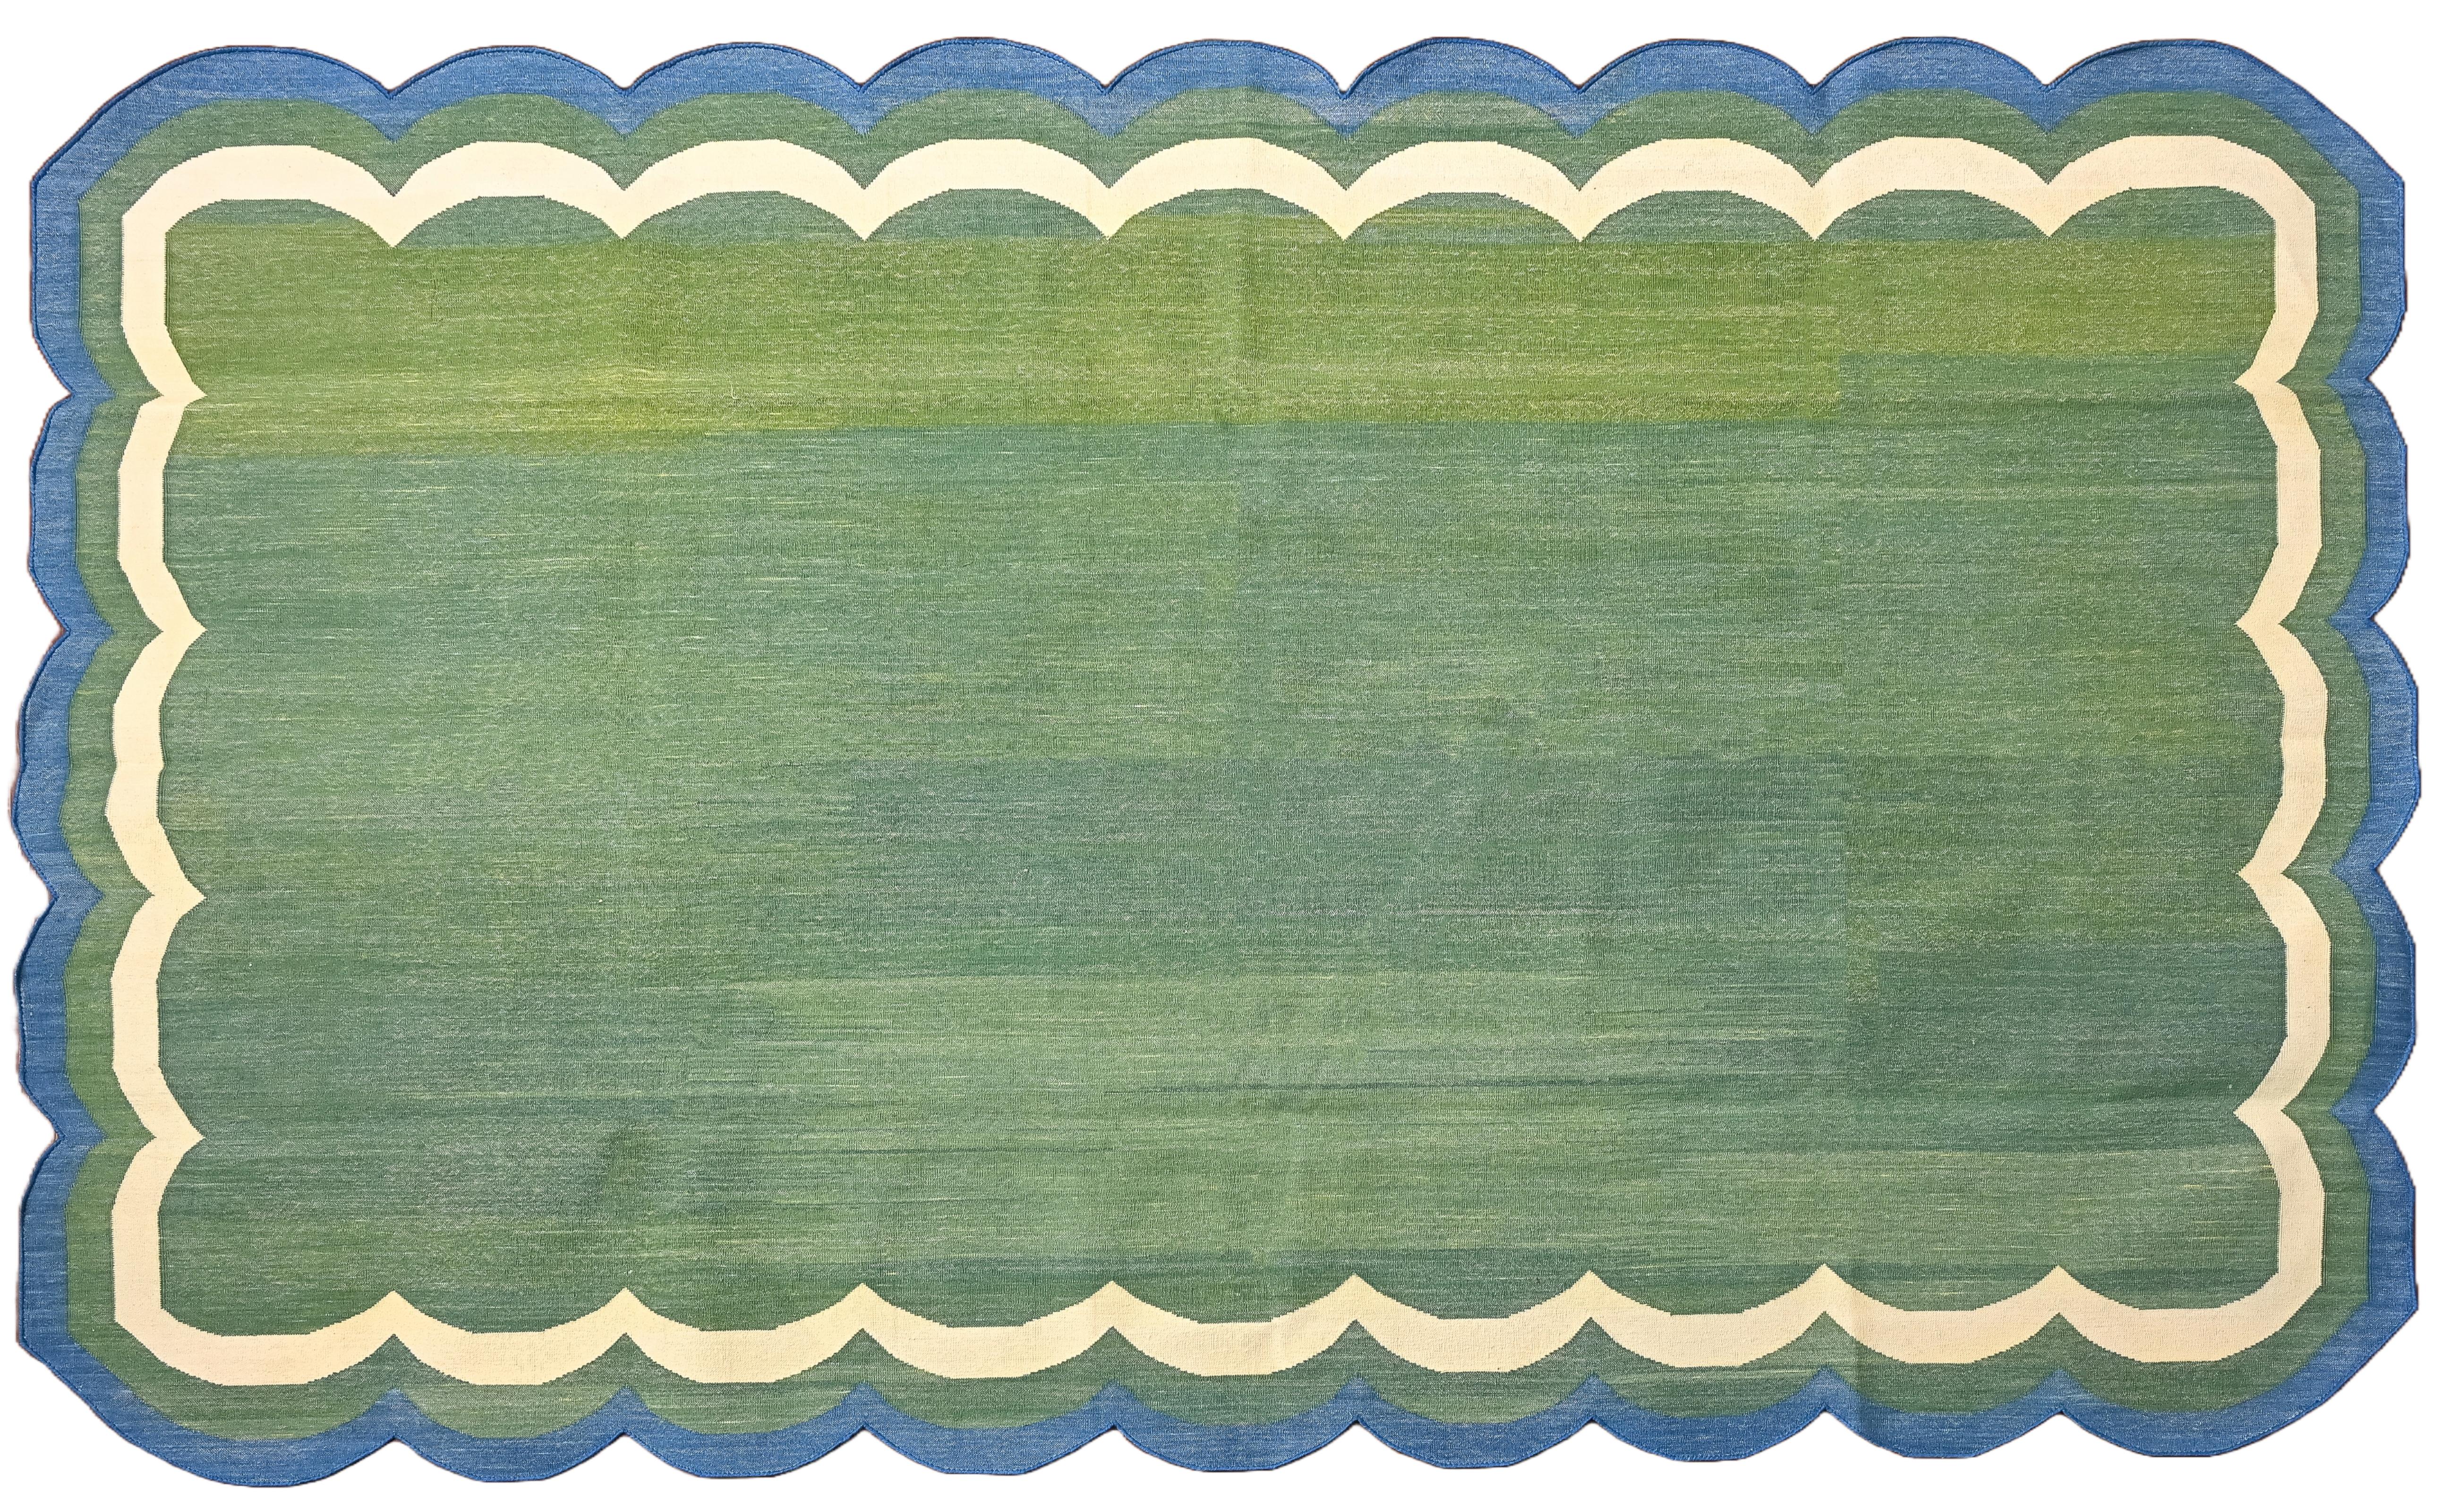 Cotton Vegetable Dyed Reversible Forest Green And Teal Blue Four Sided Scalloped Indian Rug - 5'x7'
These special flat-weave dhurries are hand-woven with 15 ply 100% cotton yarn. Due to the special manufacturing techniques used to create our rugs,